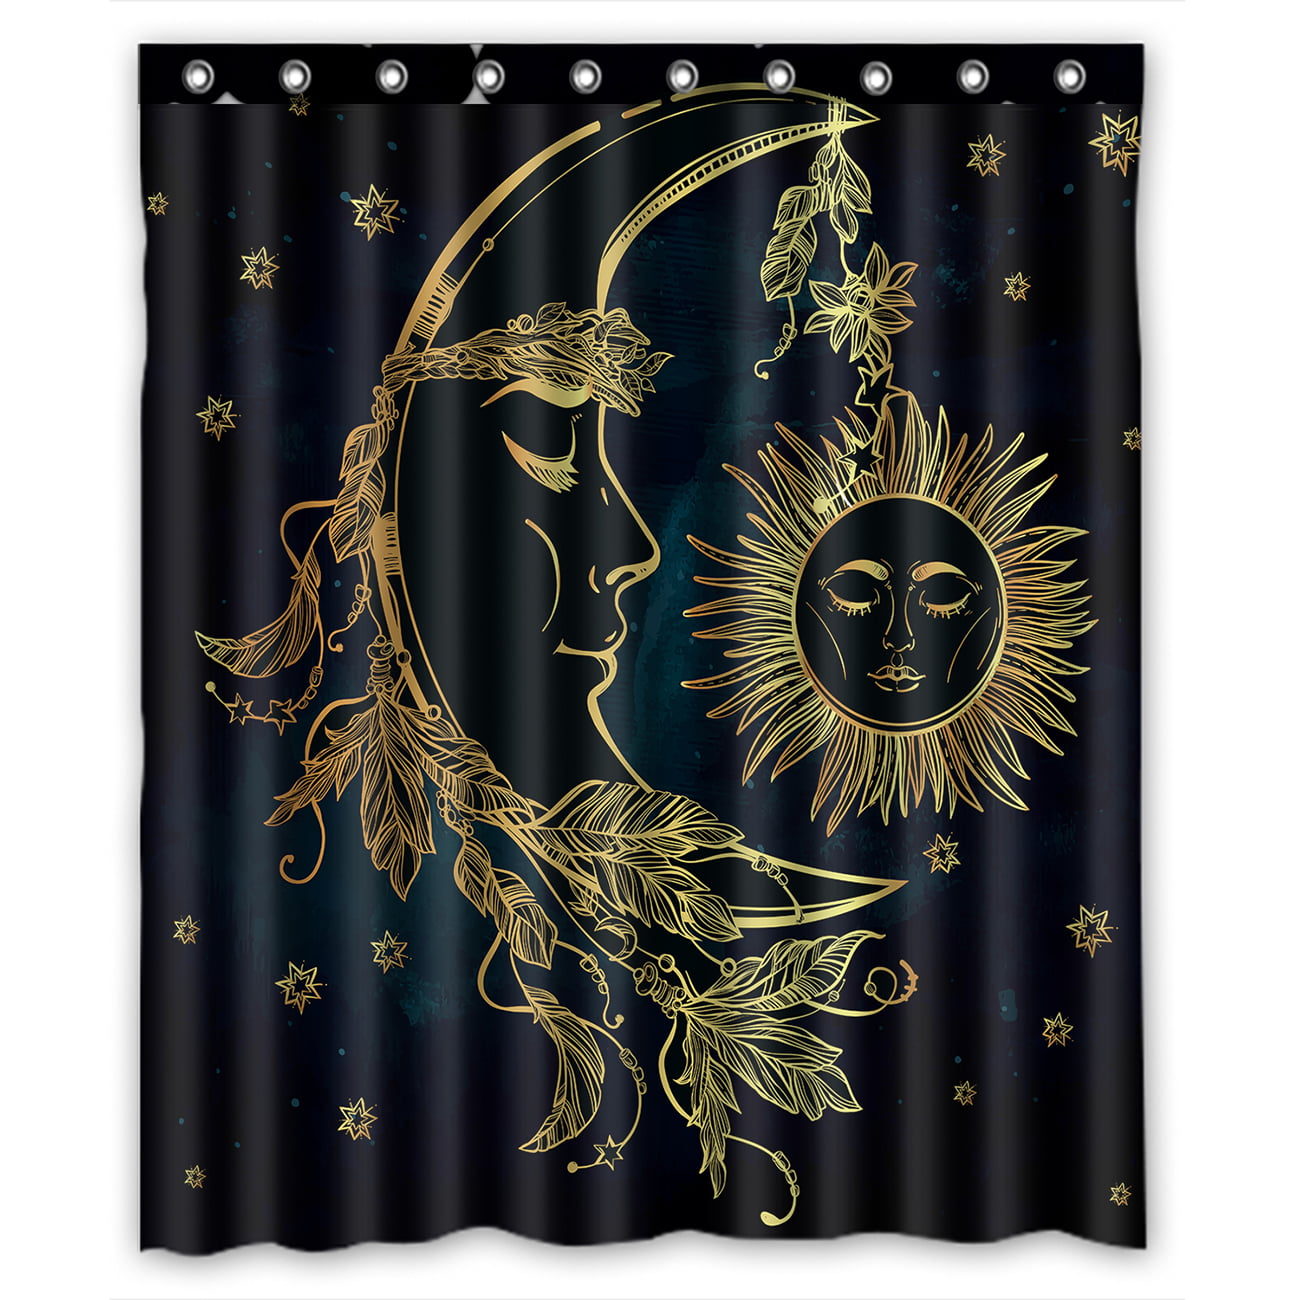 72/79" Waterproof Fabric Shower Curtain Set Starry Sky Painting a Tiger Pattern 